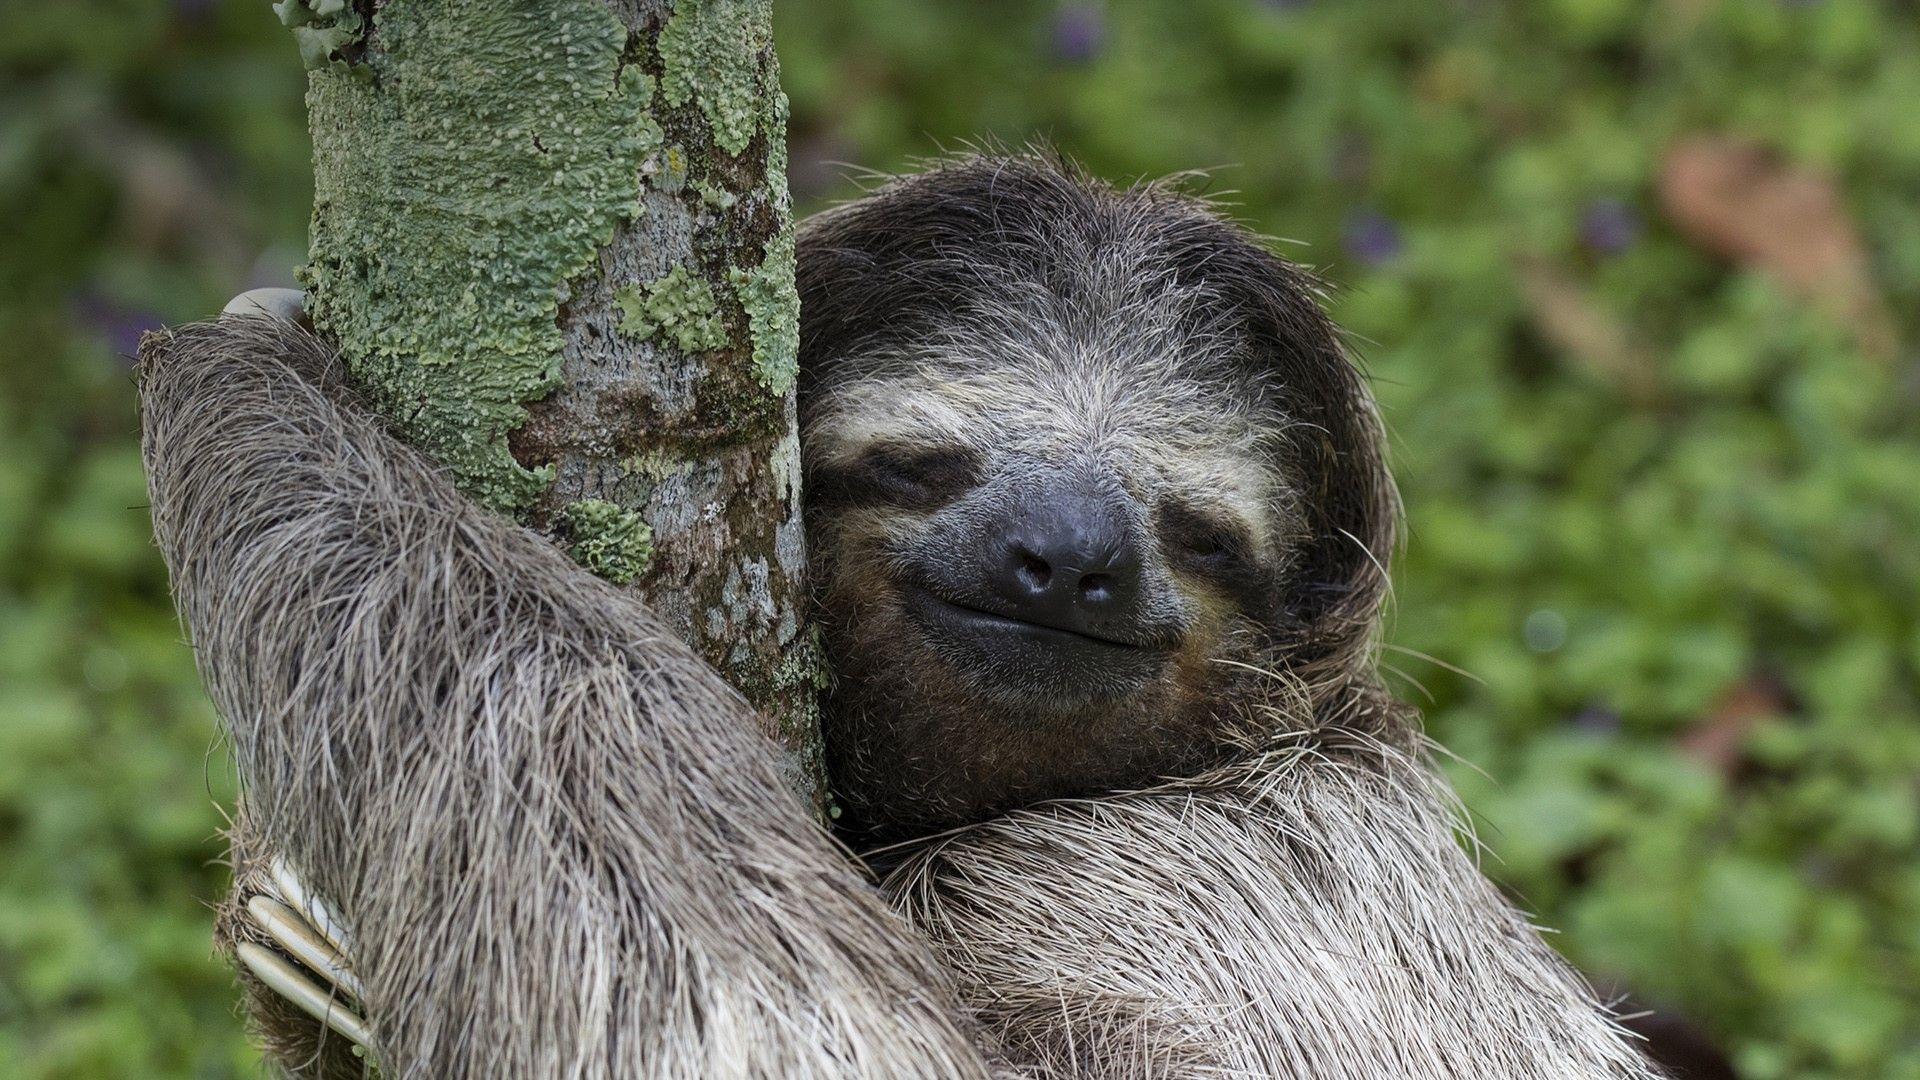 Group of Windows 10 Sloth Wallpapers